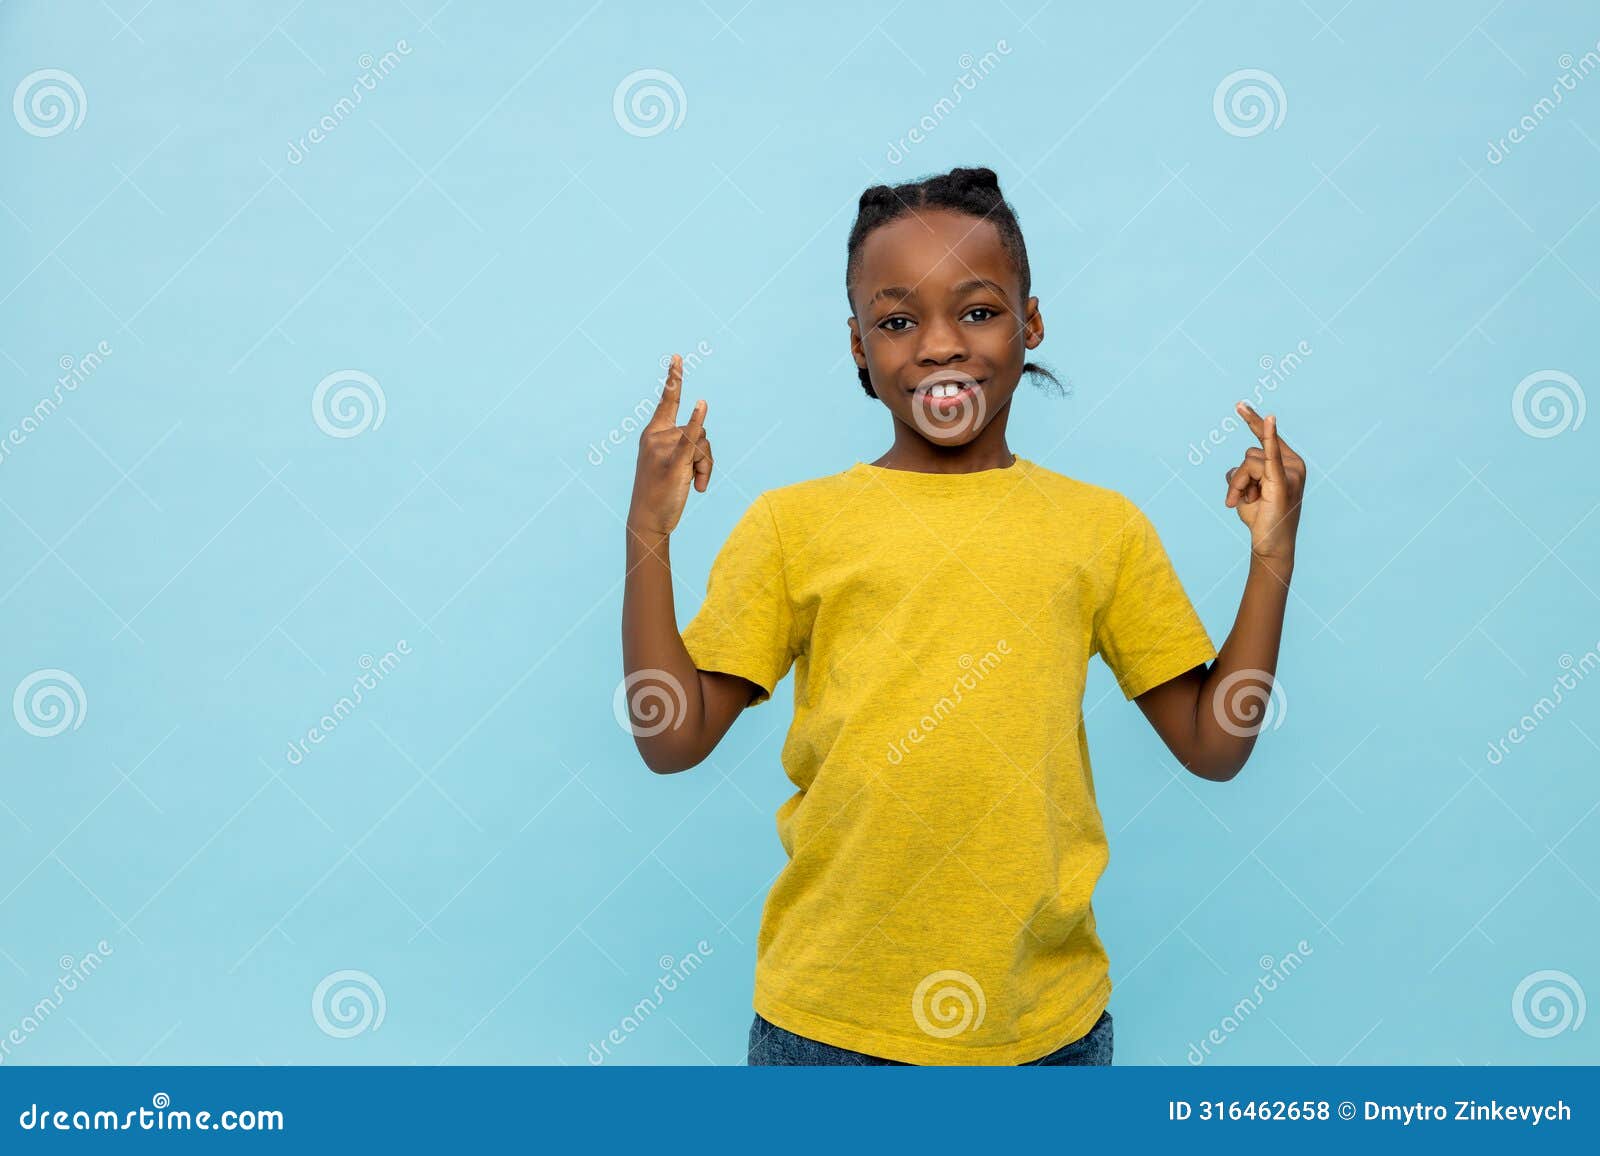 african american cute boy looking excited and contented